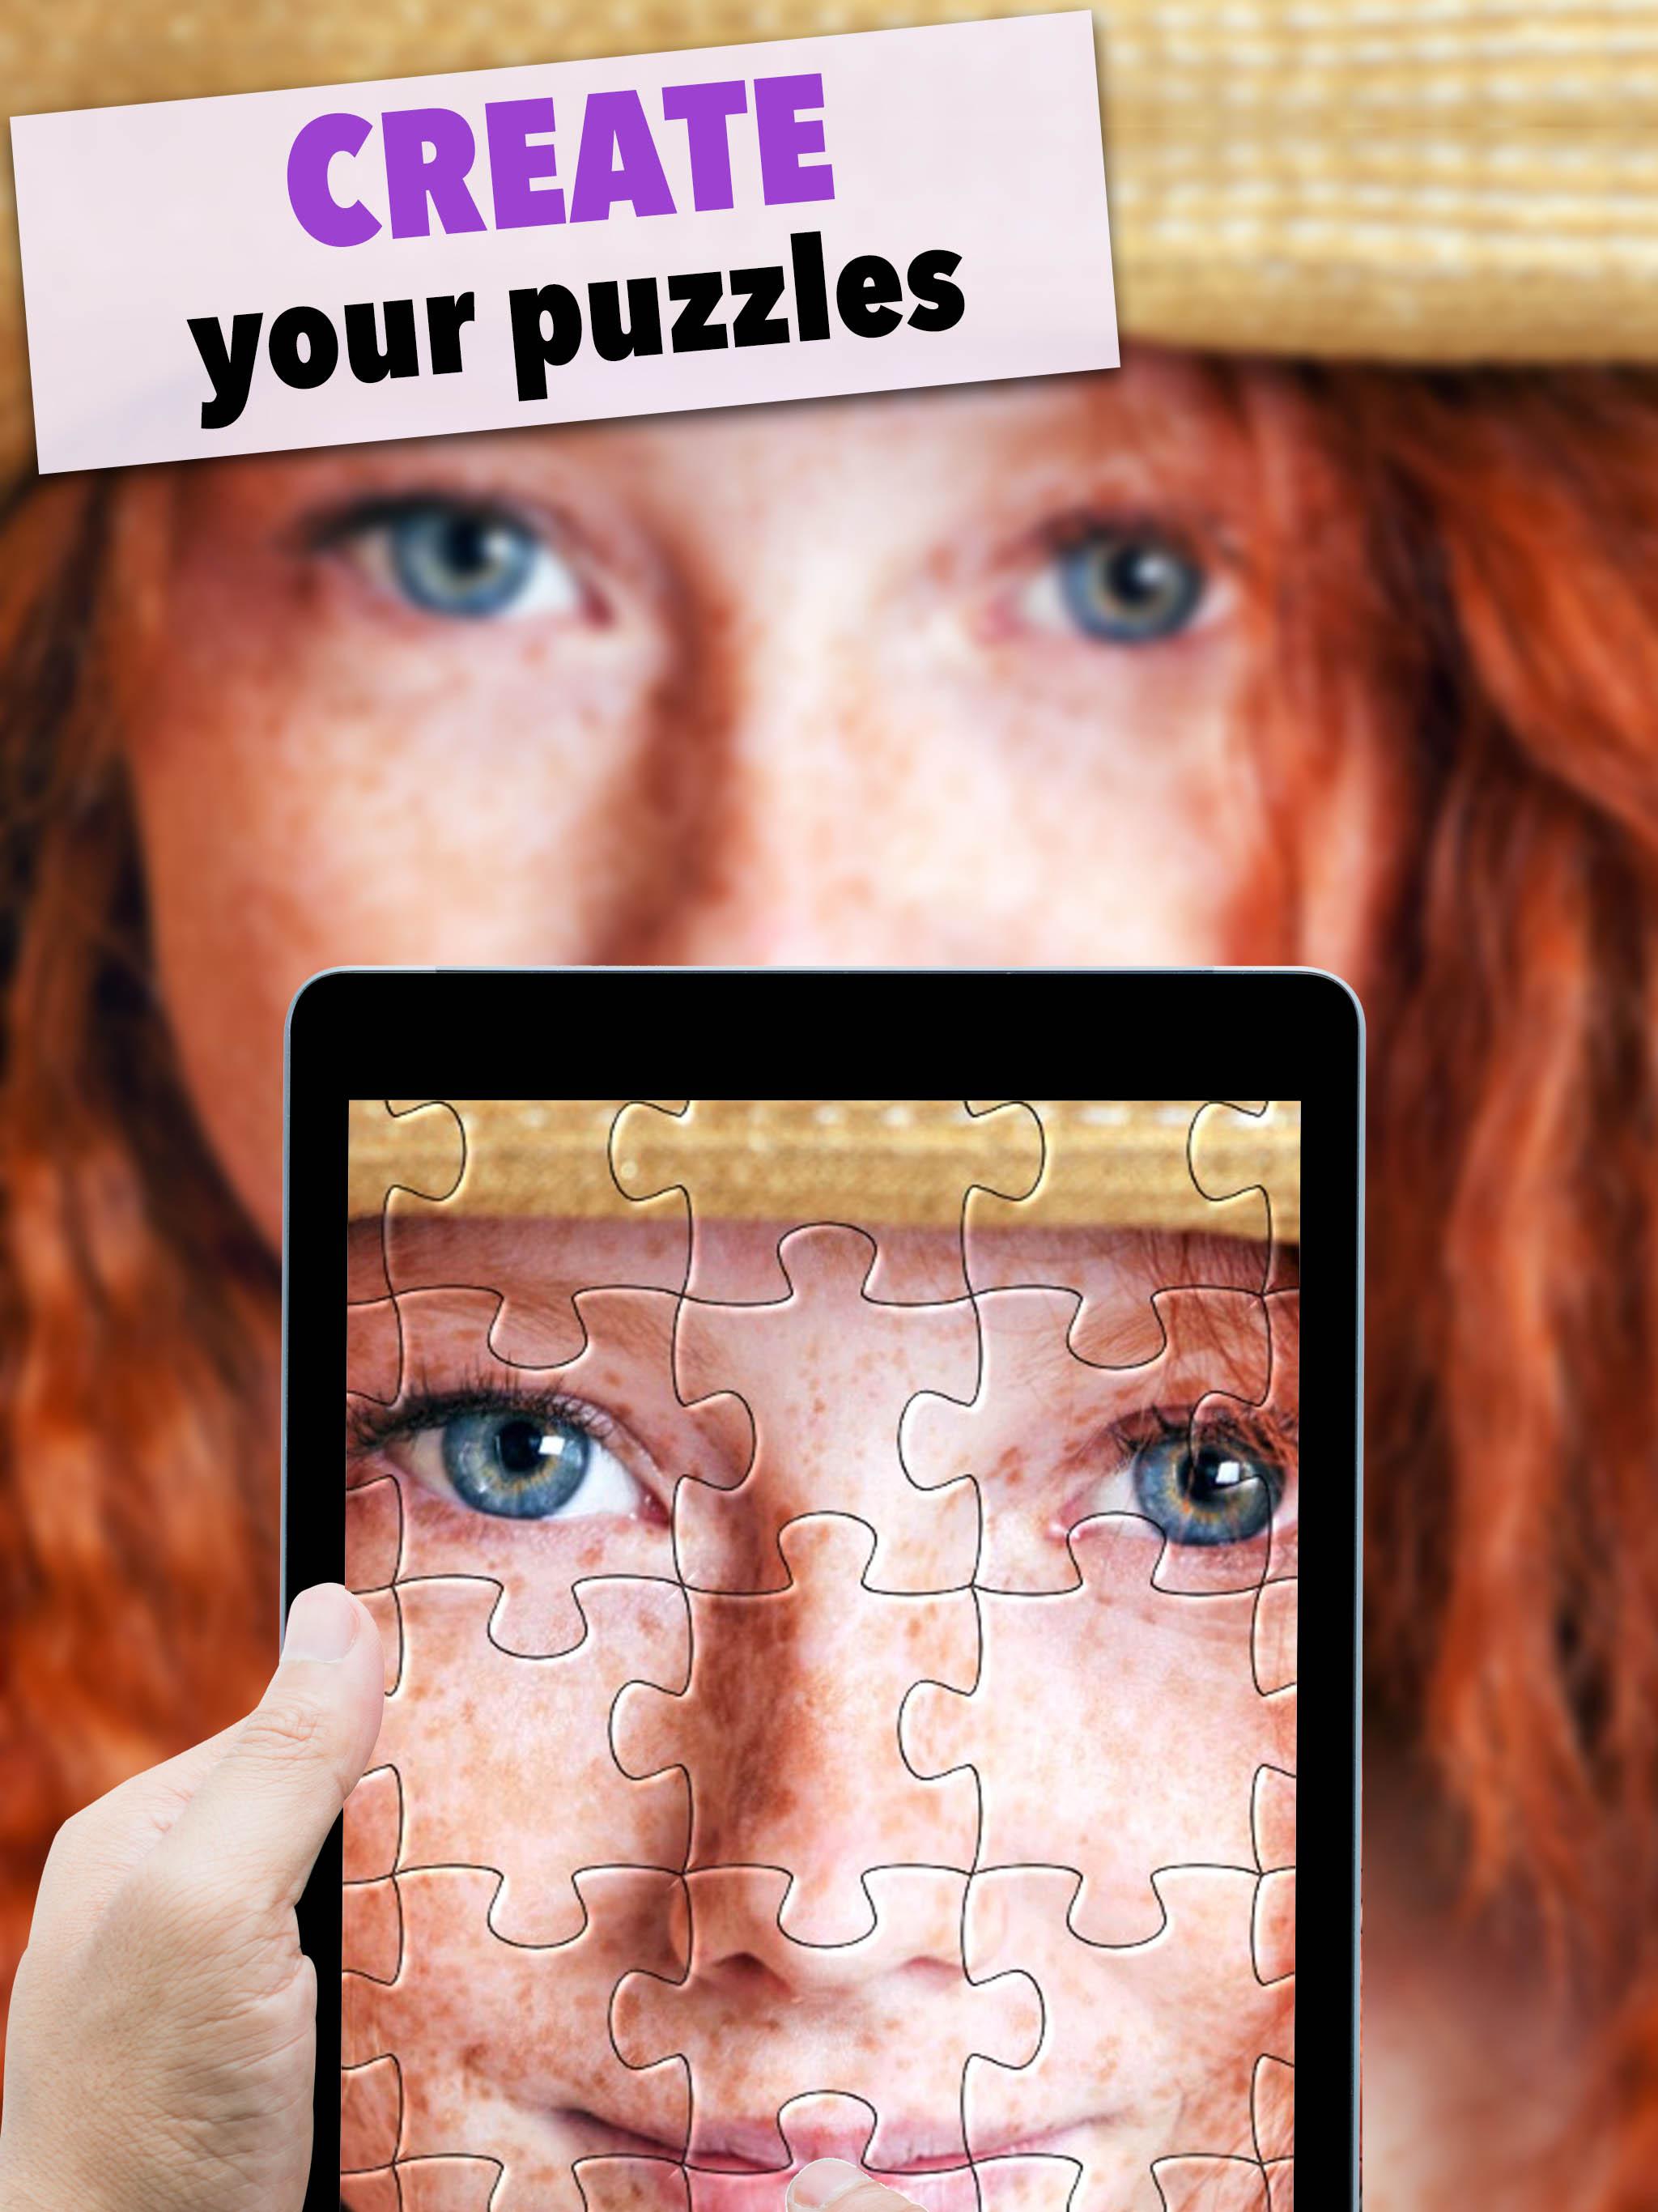 World of Puzzles - best free jigsaw puzzle games 1.16 Screenshot 6